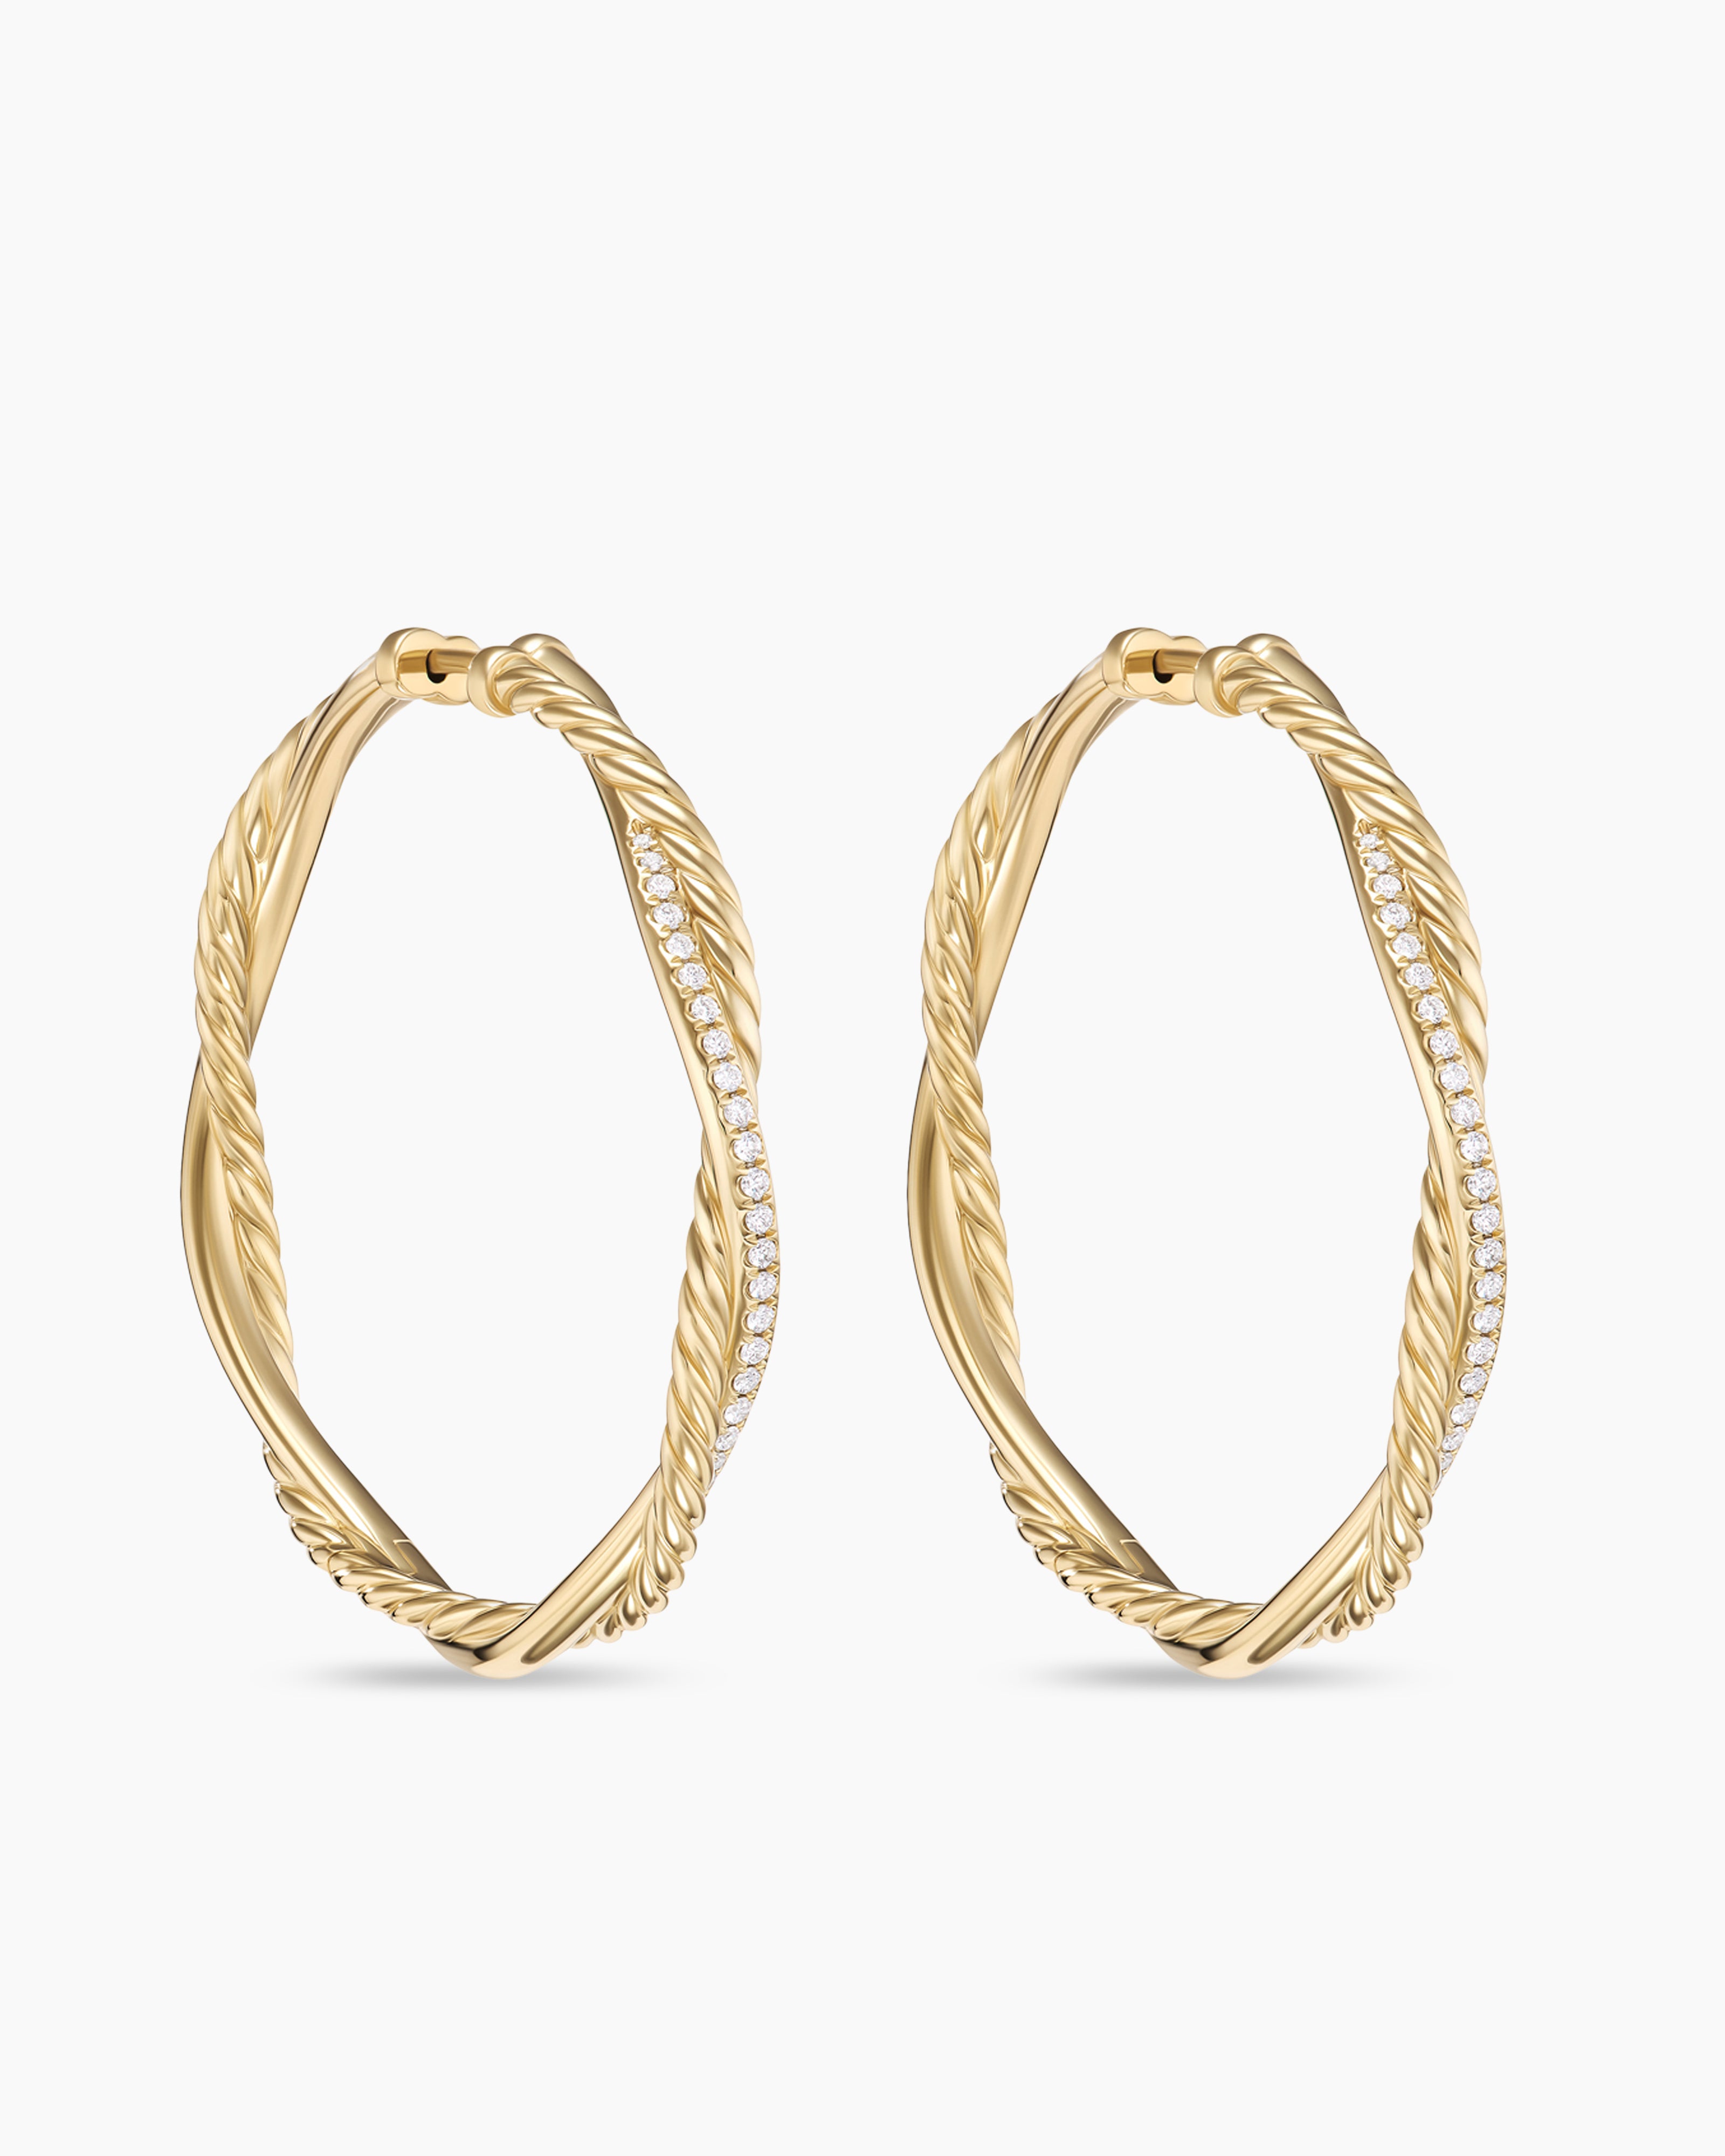 18K gold earrings as a gift? Find them here and get them customised!